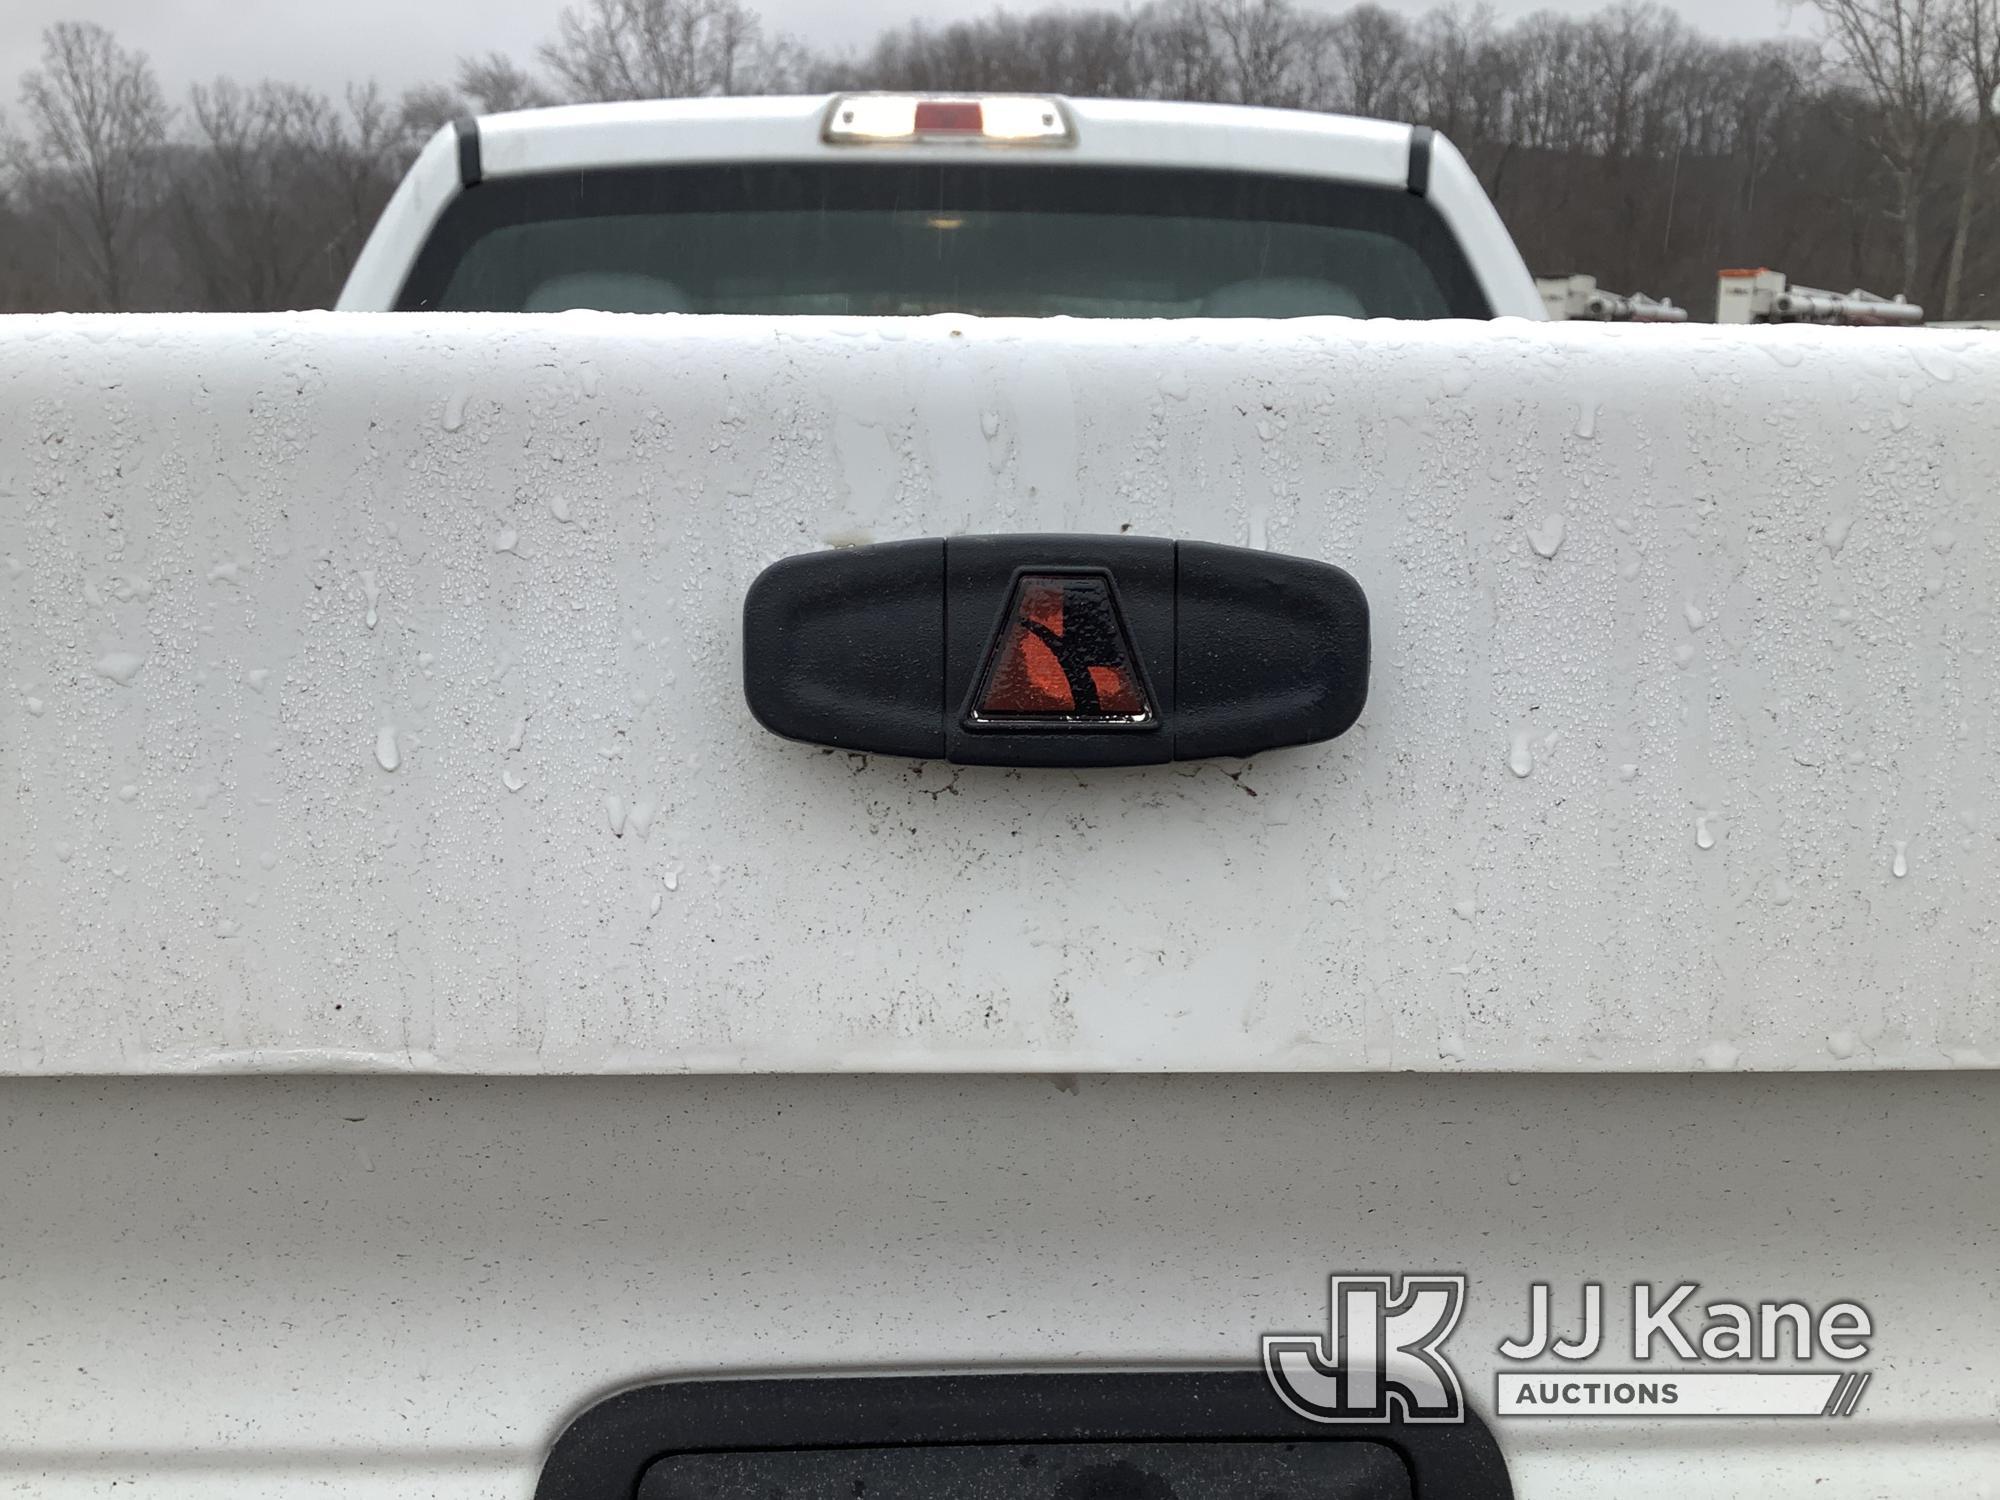 (Smock, PA) 2014 Ford F150 4x4 Extended-Cab Pickup Truck Title Delay) (Runs & Moves, Rust Damage